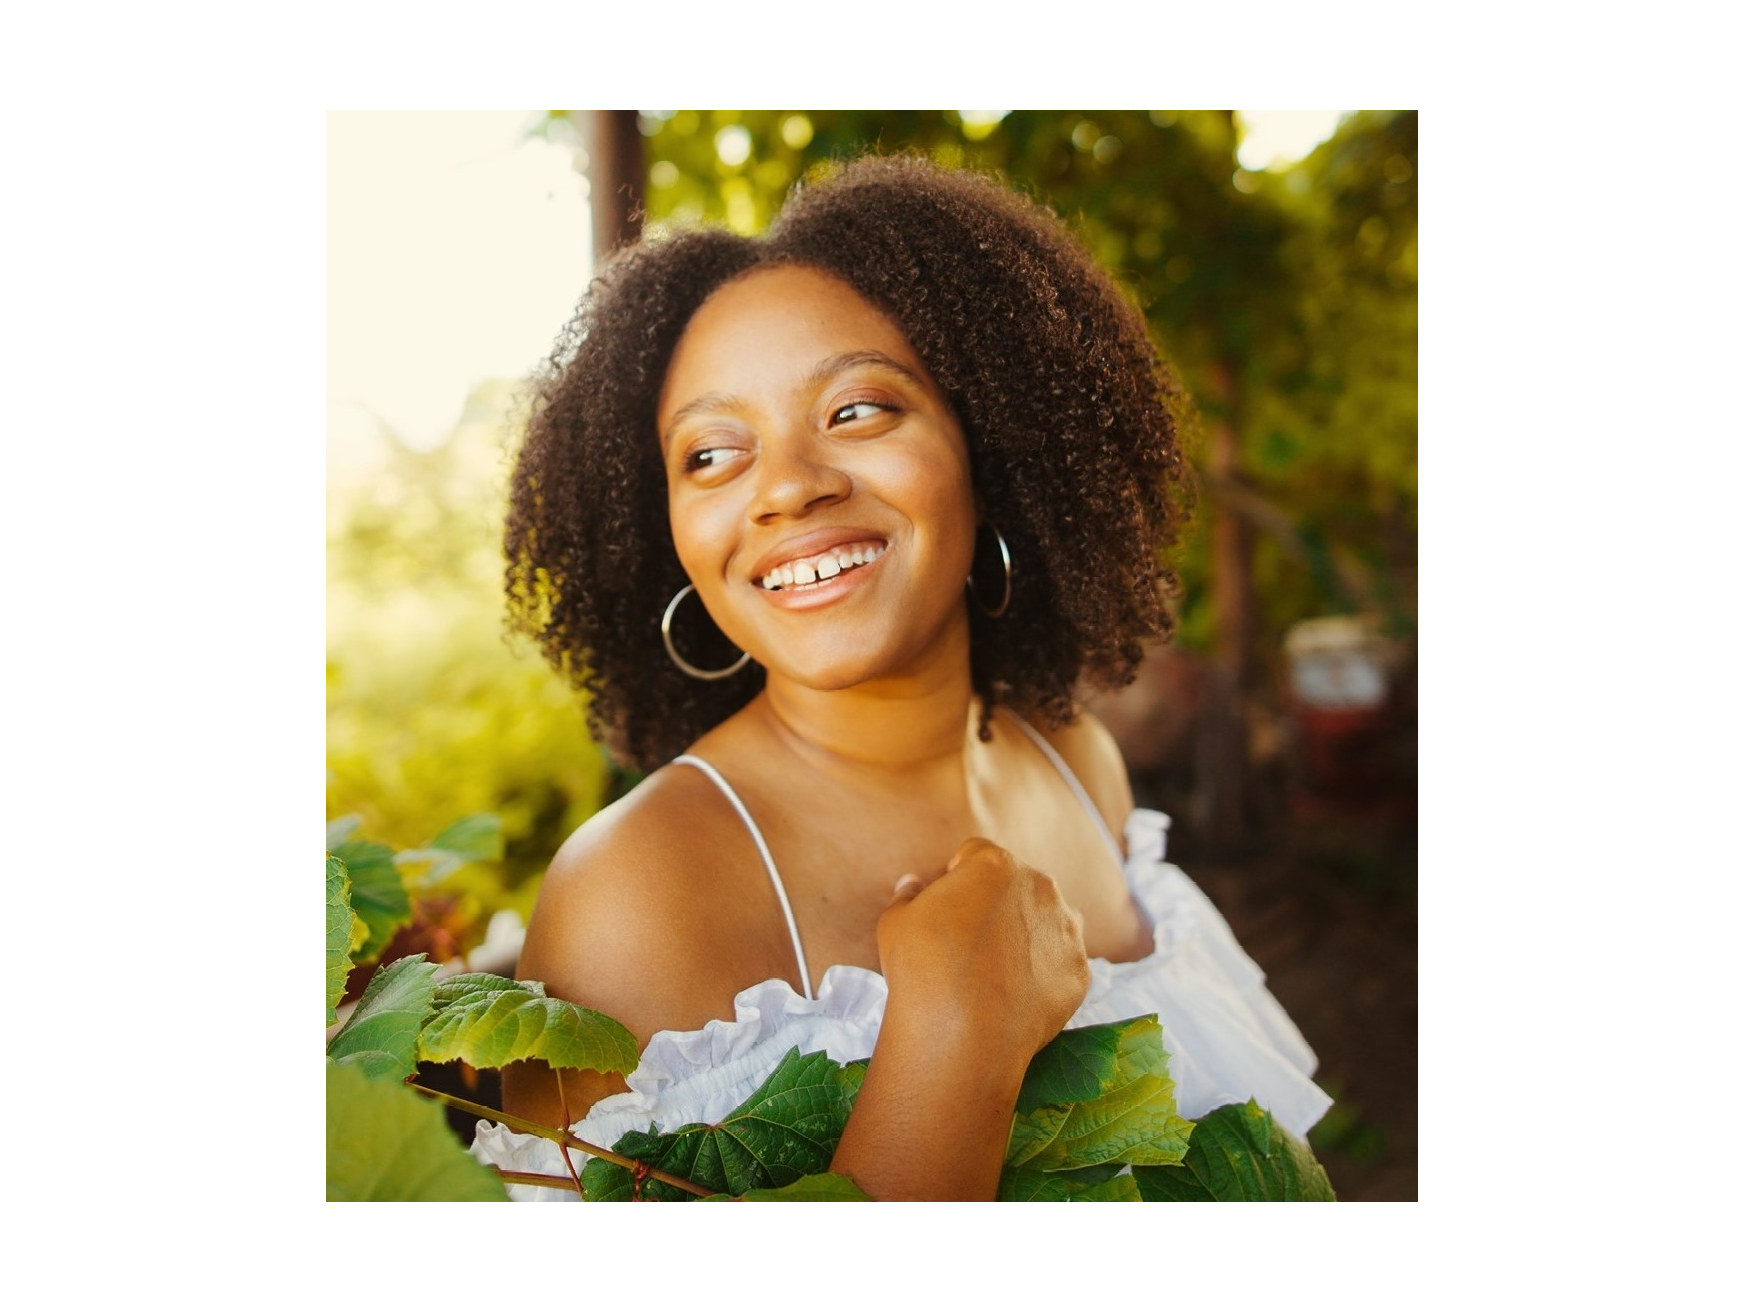 Haile Thomas: Cultivating a Legacy of Health, Empowerment, and Compassion